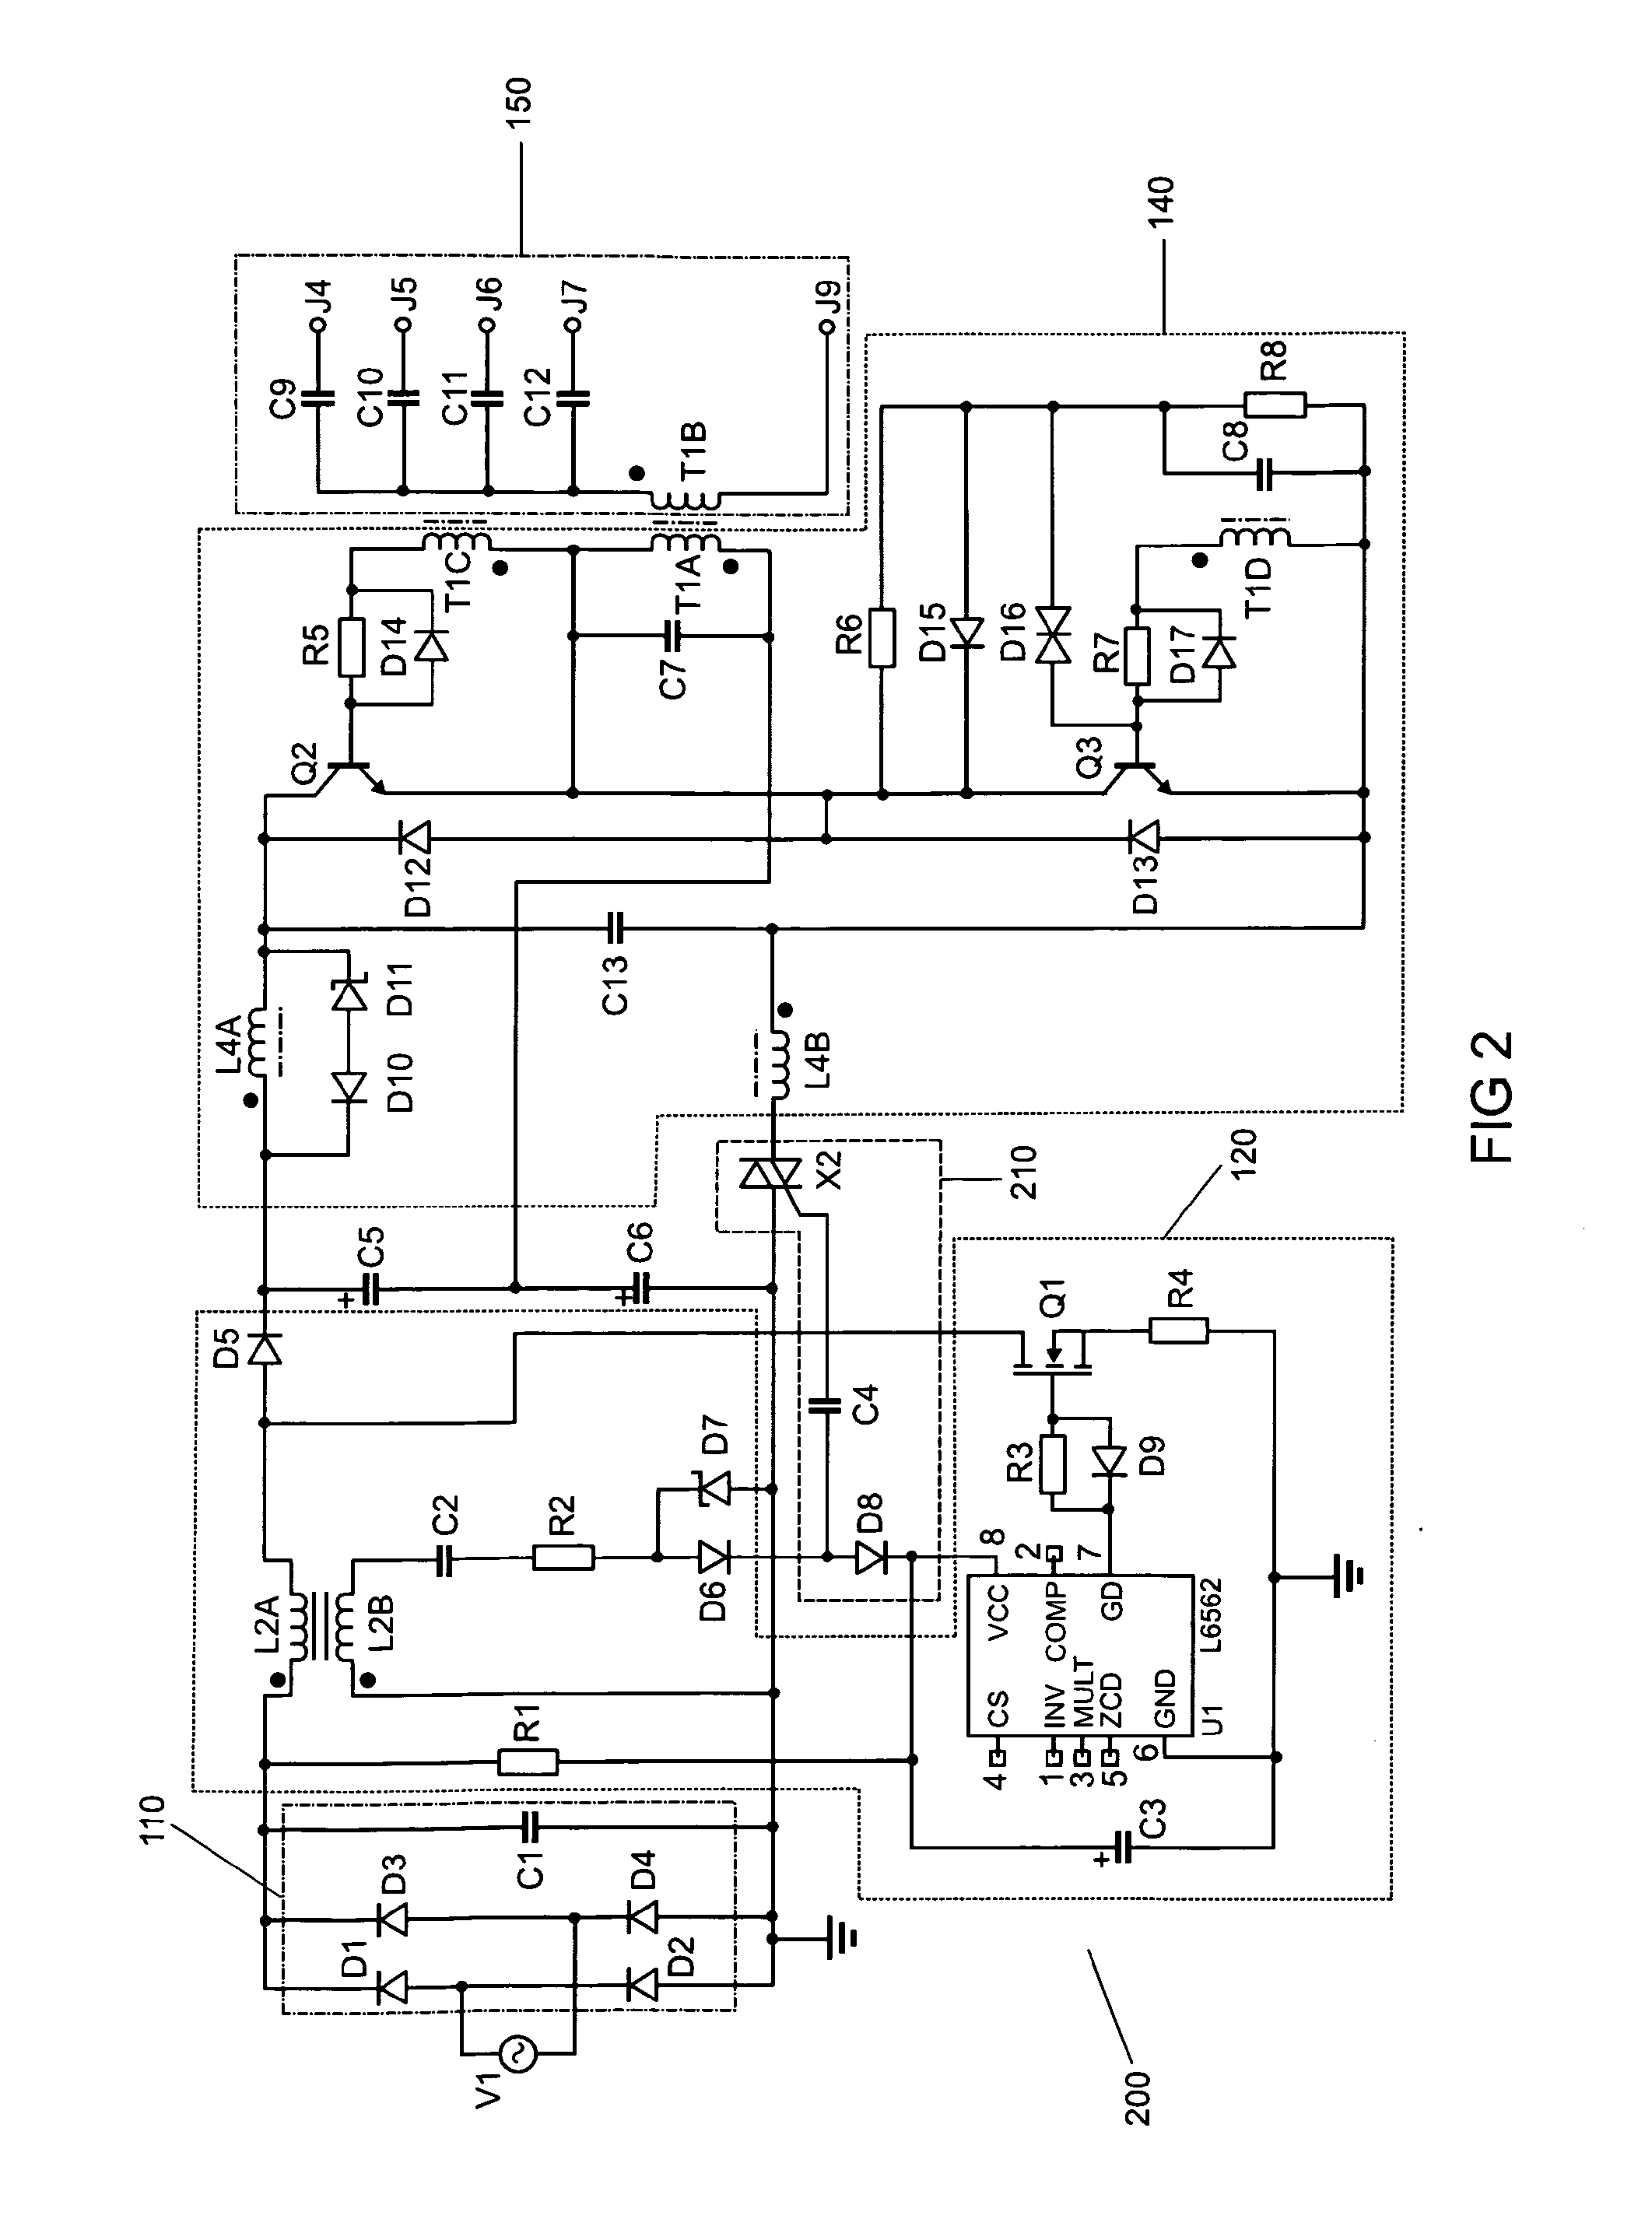 Electronic ballast for lighting unit and lighting apparatus